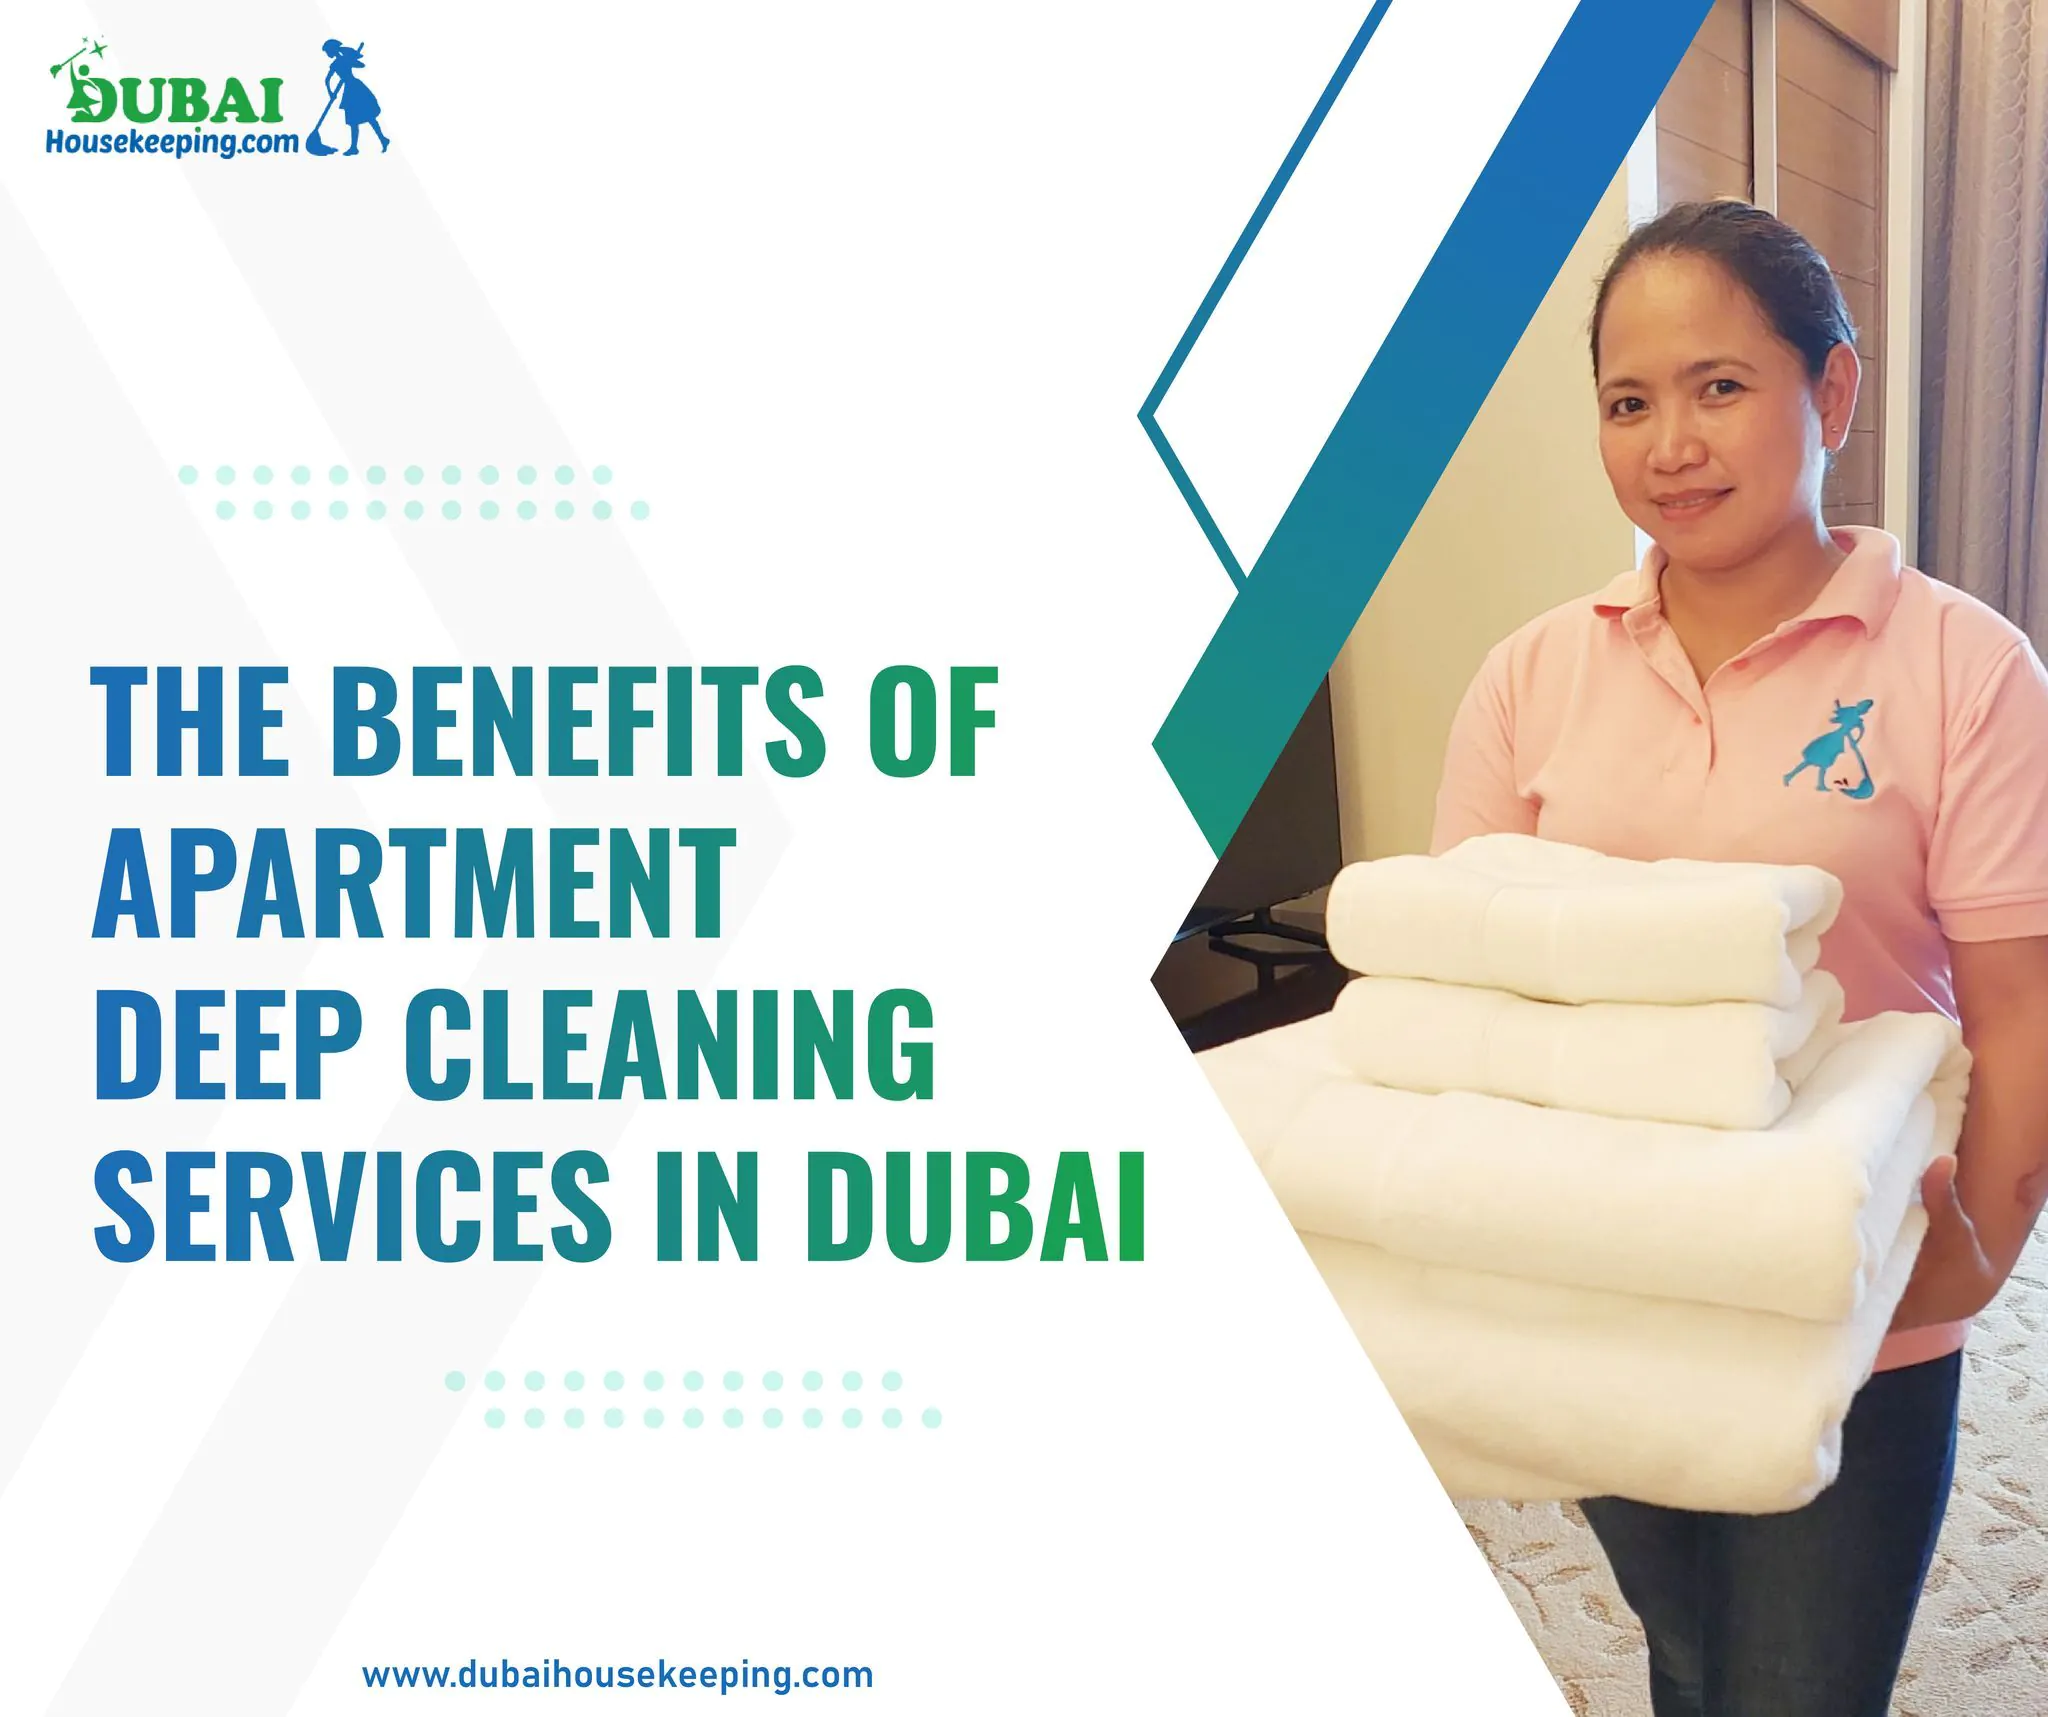 The Benefits of Apartment Deep Cleaning Services in Dubai